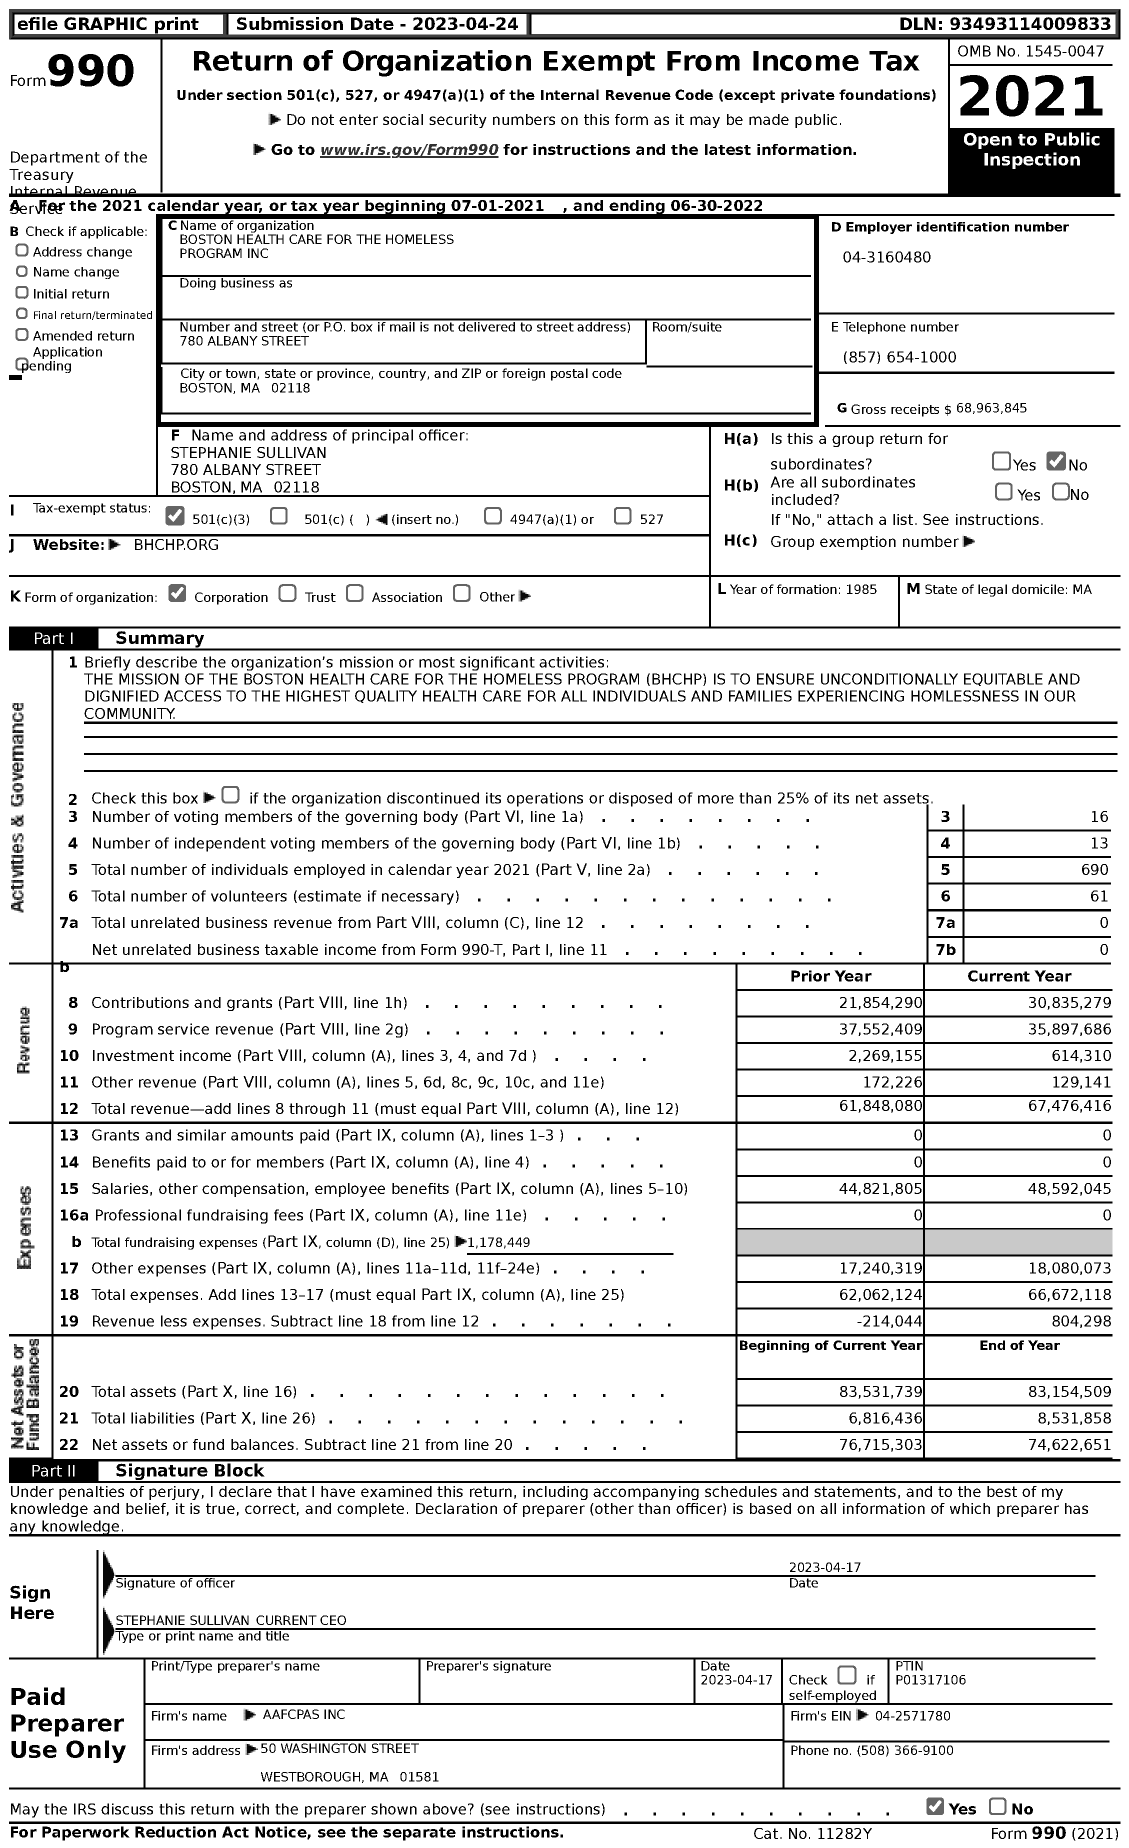 Image of first page of 2021 Form 990 for Boston Health Care for the Homeless Program (BHCHP)